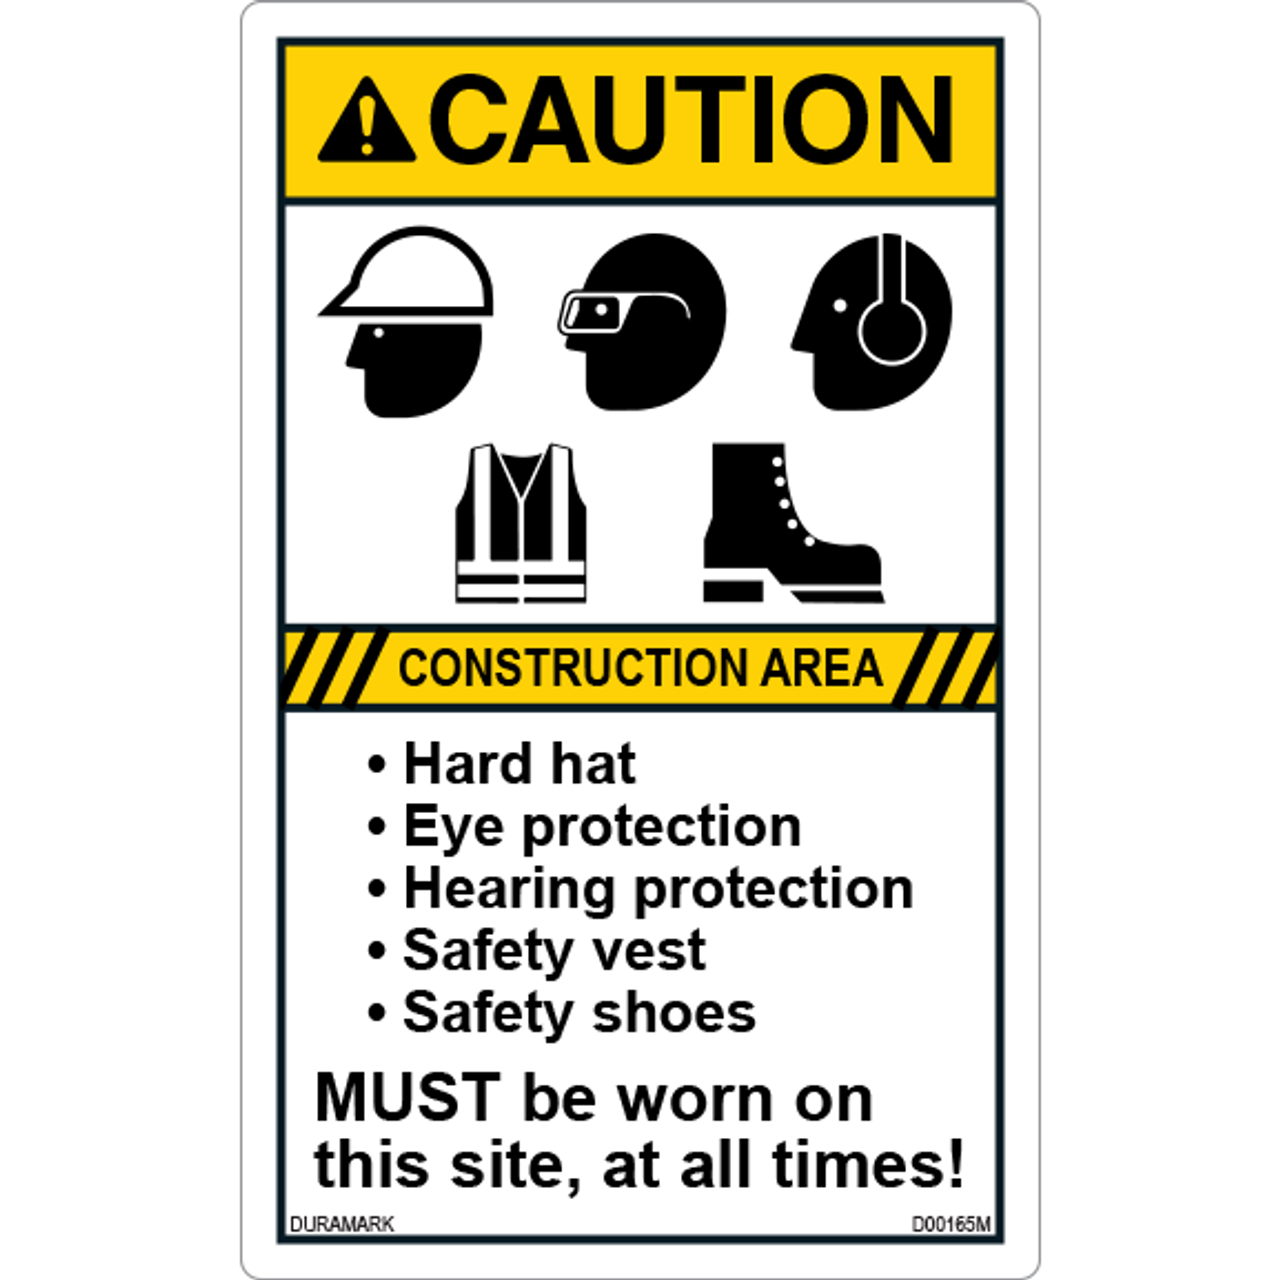 eye and ear protection sign